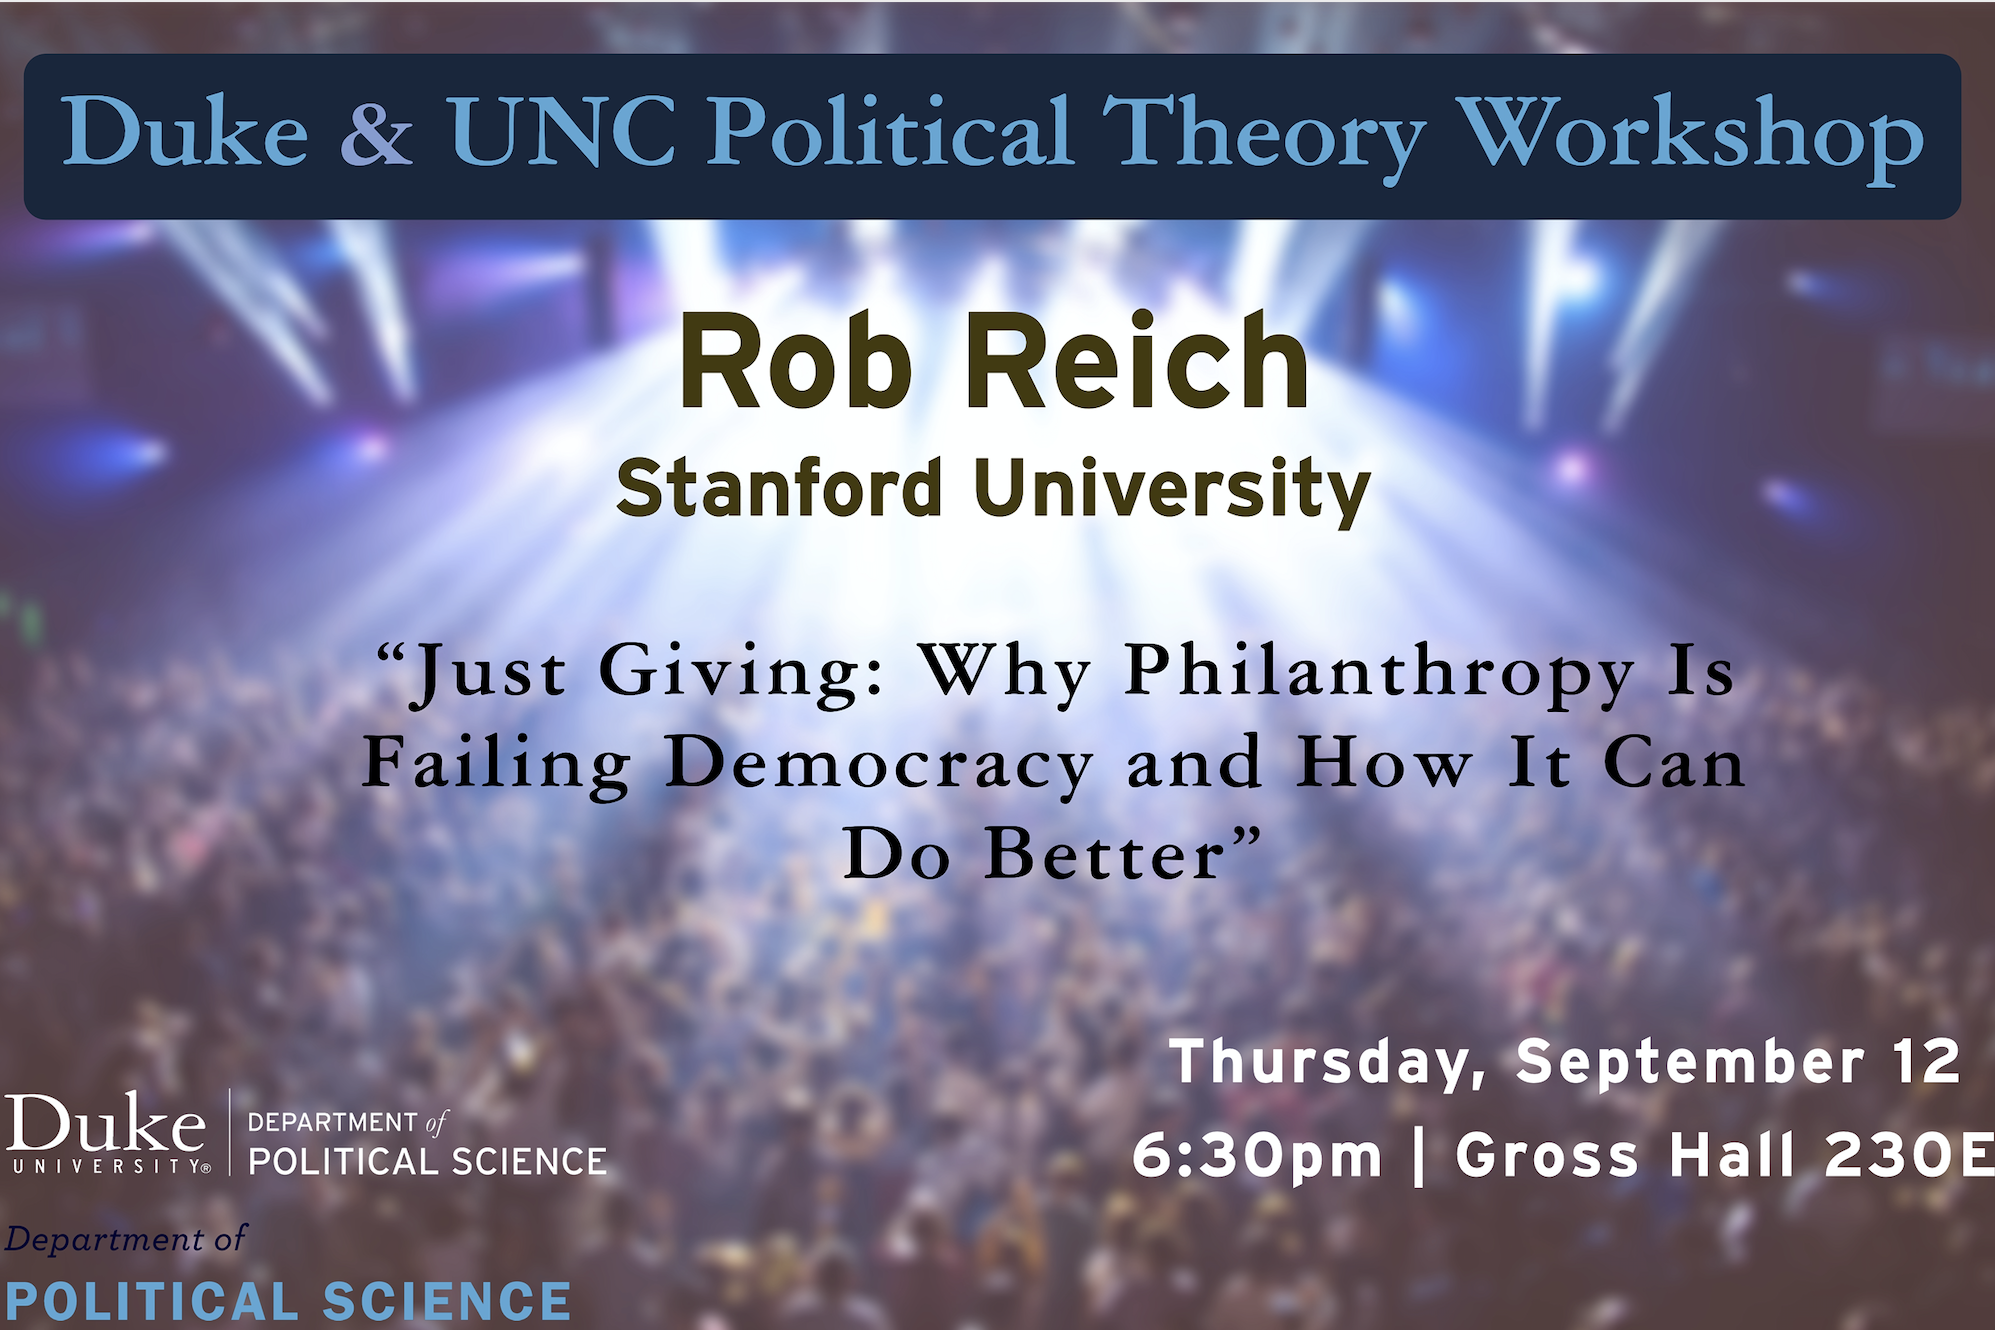 Flyer for Rob Reich event